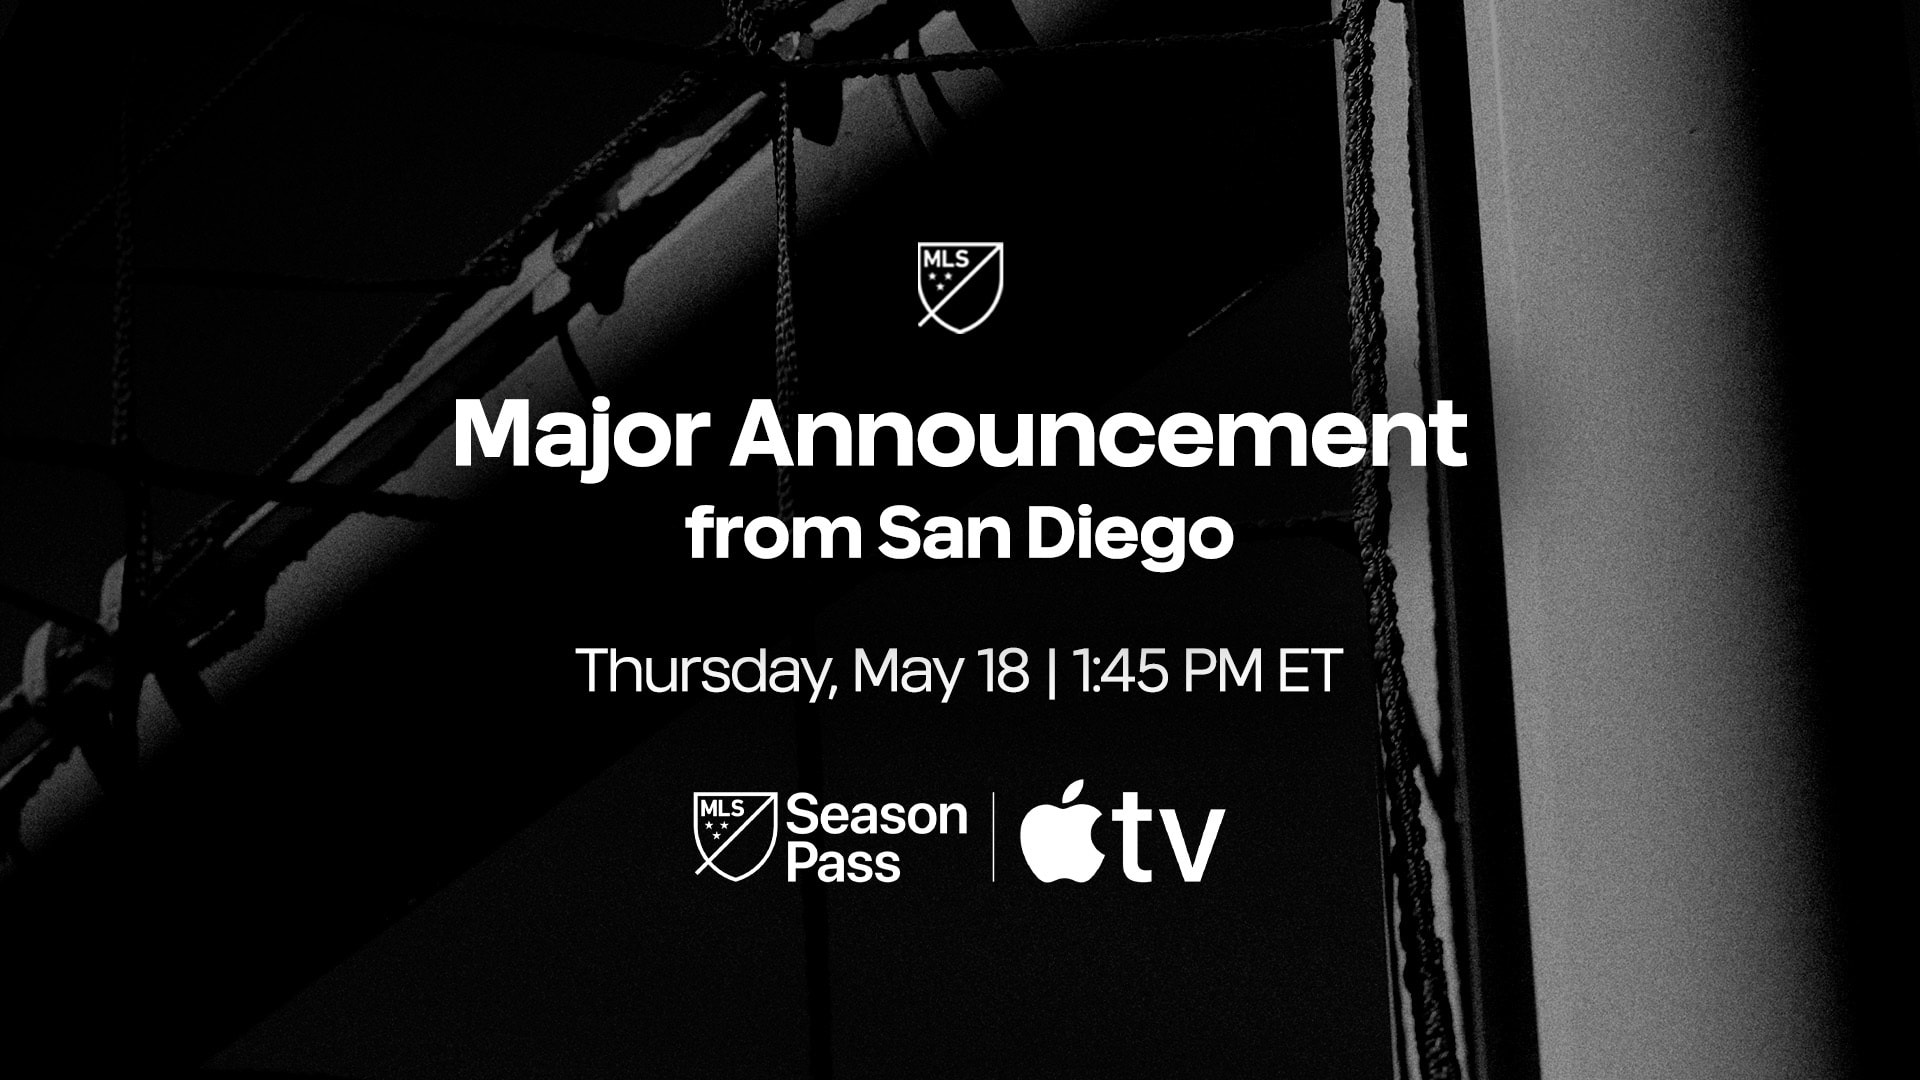 MLS Commissioner Don Garber set to make major announcement from San Diego | MLSSoccer.com thumbnail